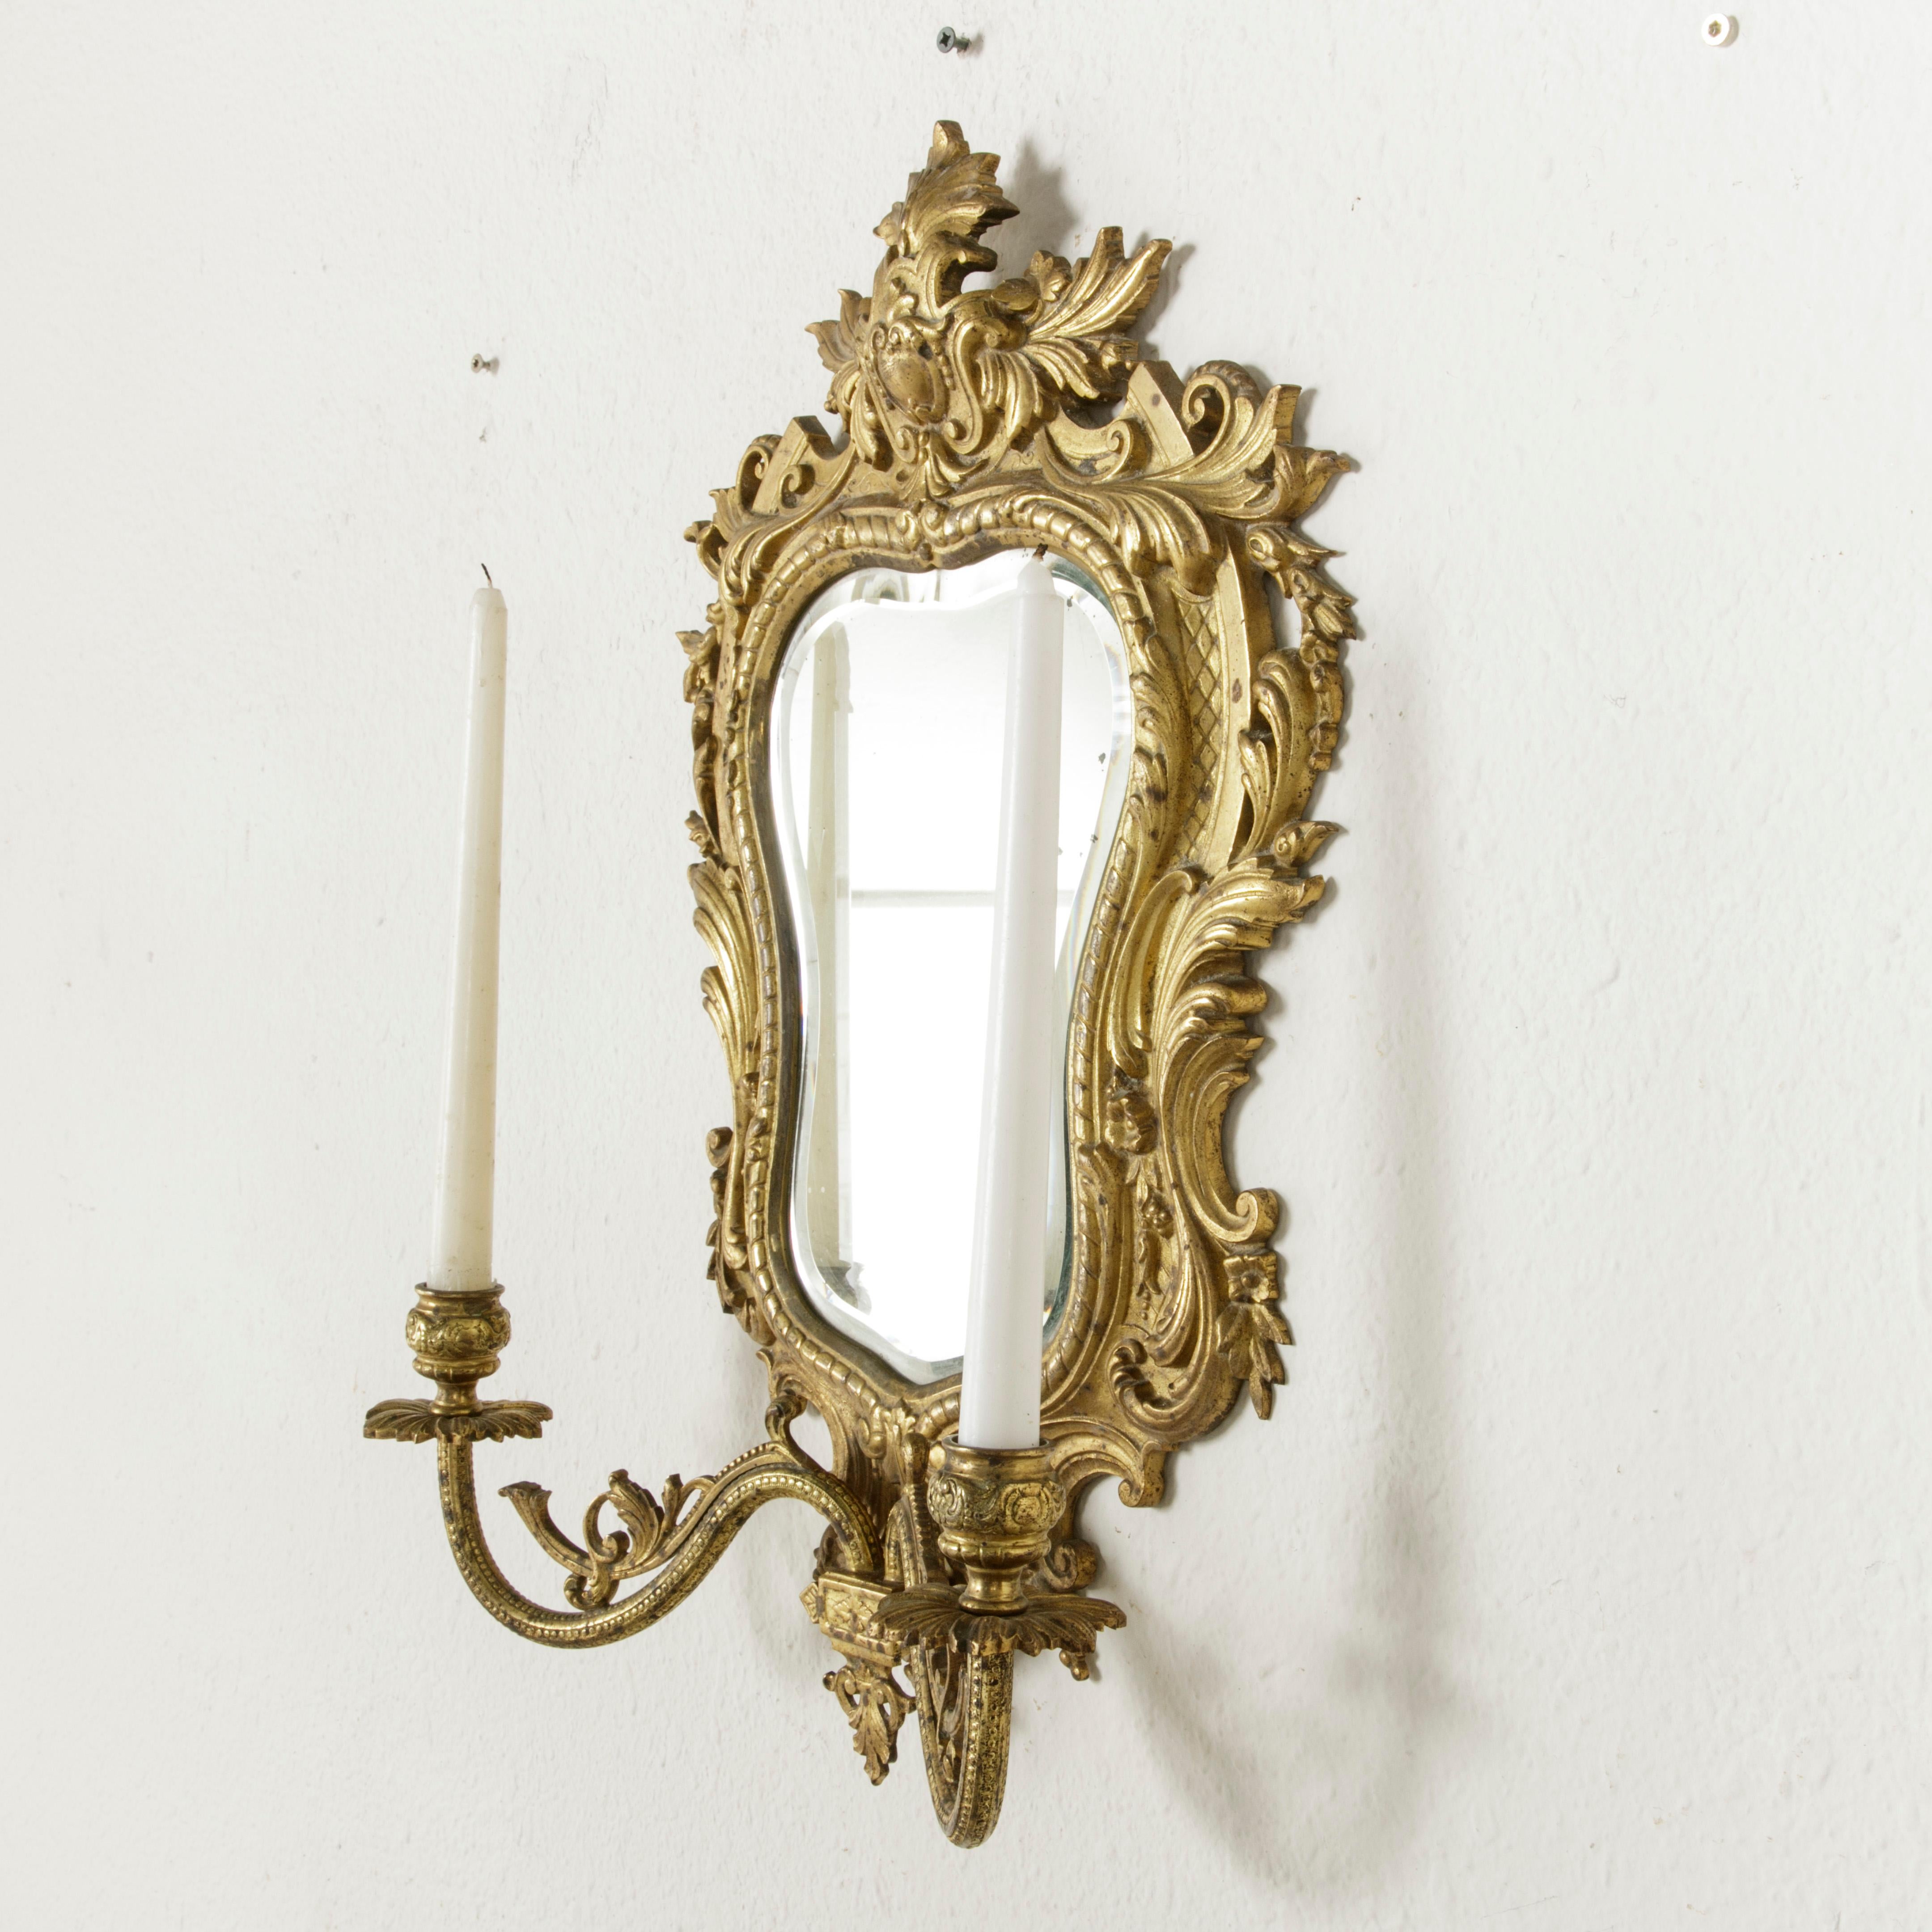 This late 19th century French gilt bronze girandole or wall mirror sconce features a beveled mirror and two candleholders. A beautifully executed decorative object, its original function was to increase illumination by reflecting the light from the